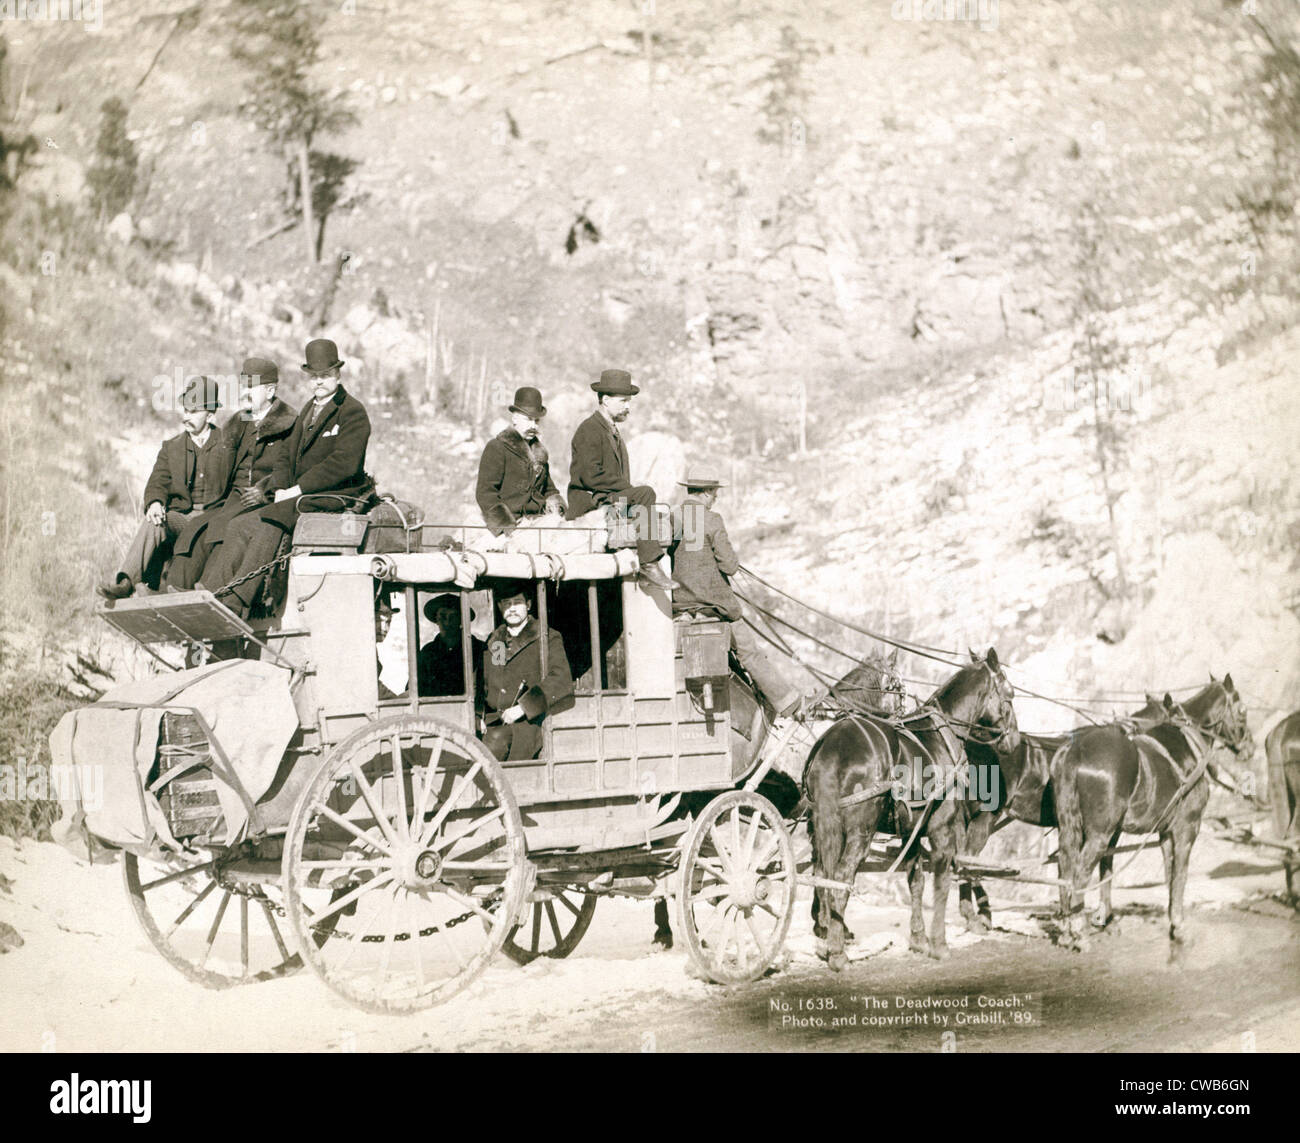 The Deadwood Coach. Side view of a stagecoach; formally dressed men sitting in and on top of coach. Deadwood, SD. John C. Stock Photo